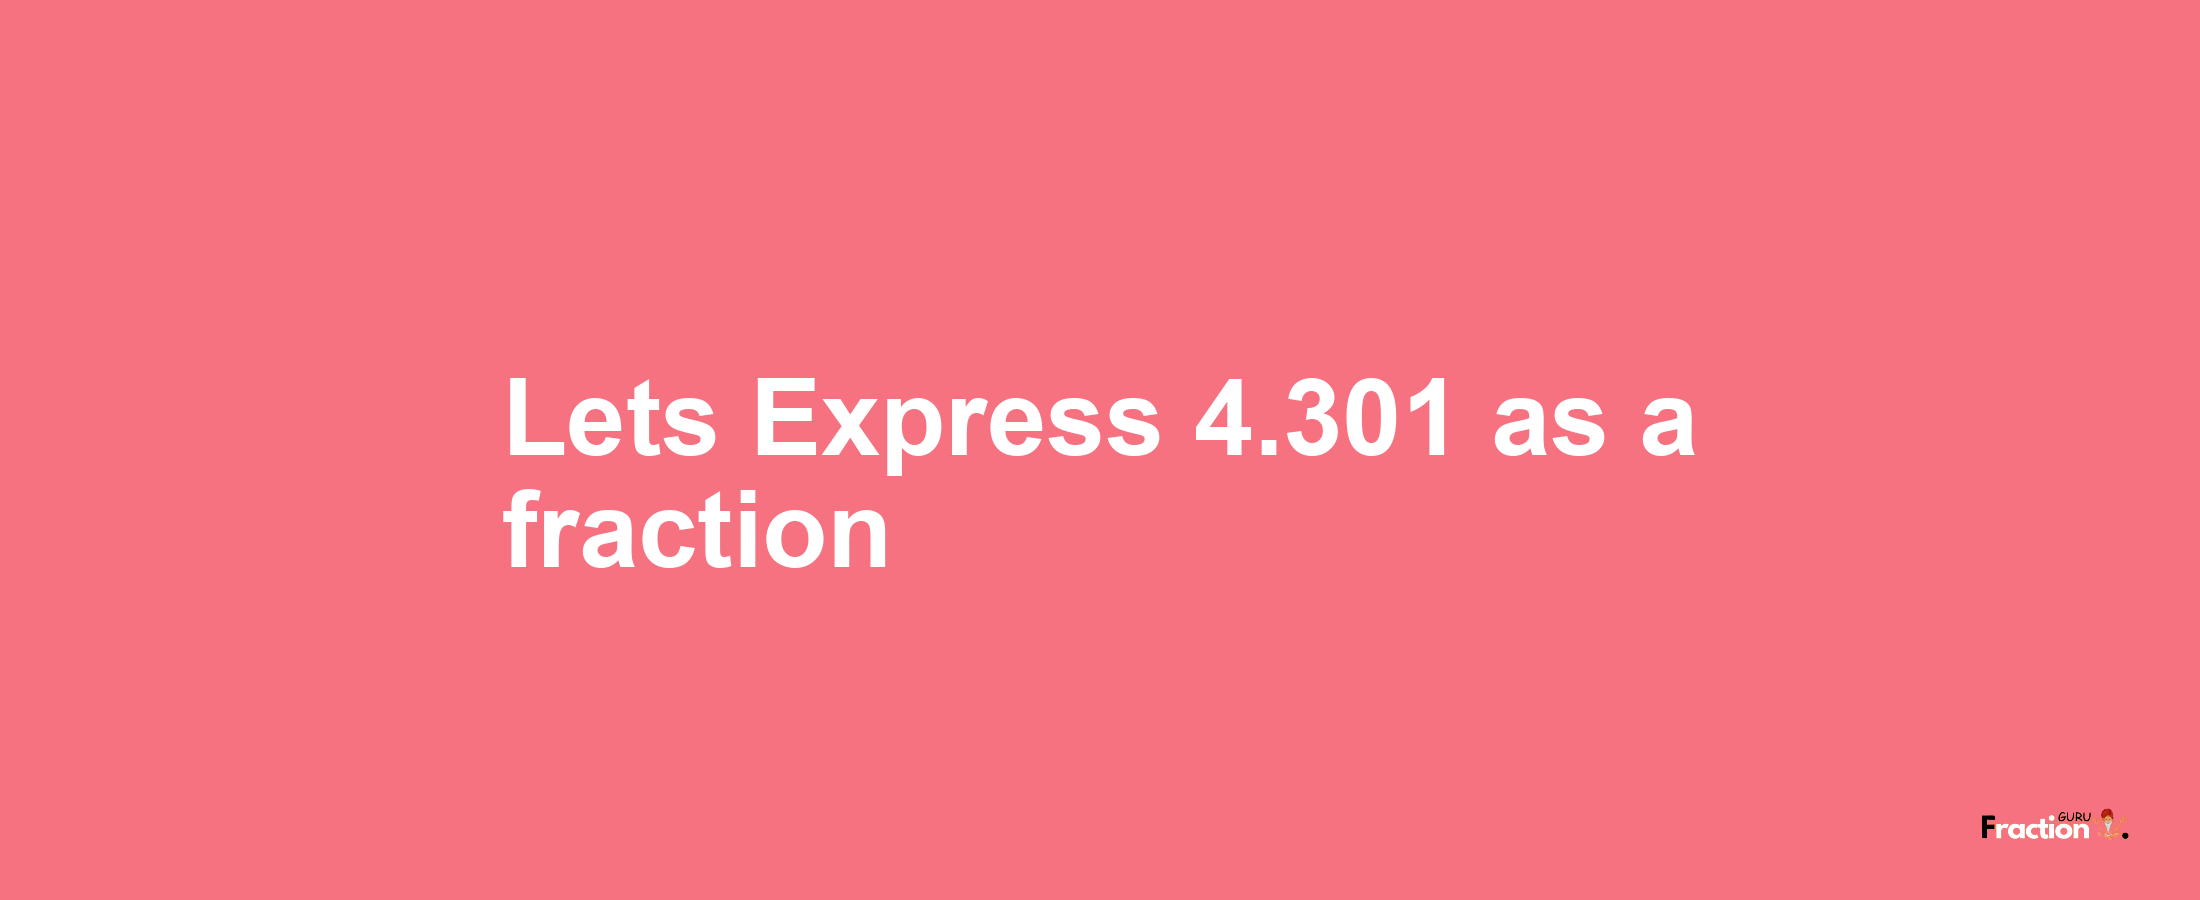 Lets Express 4.301 as afraction